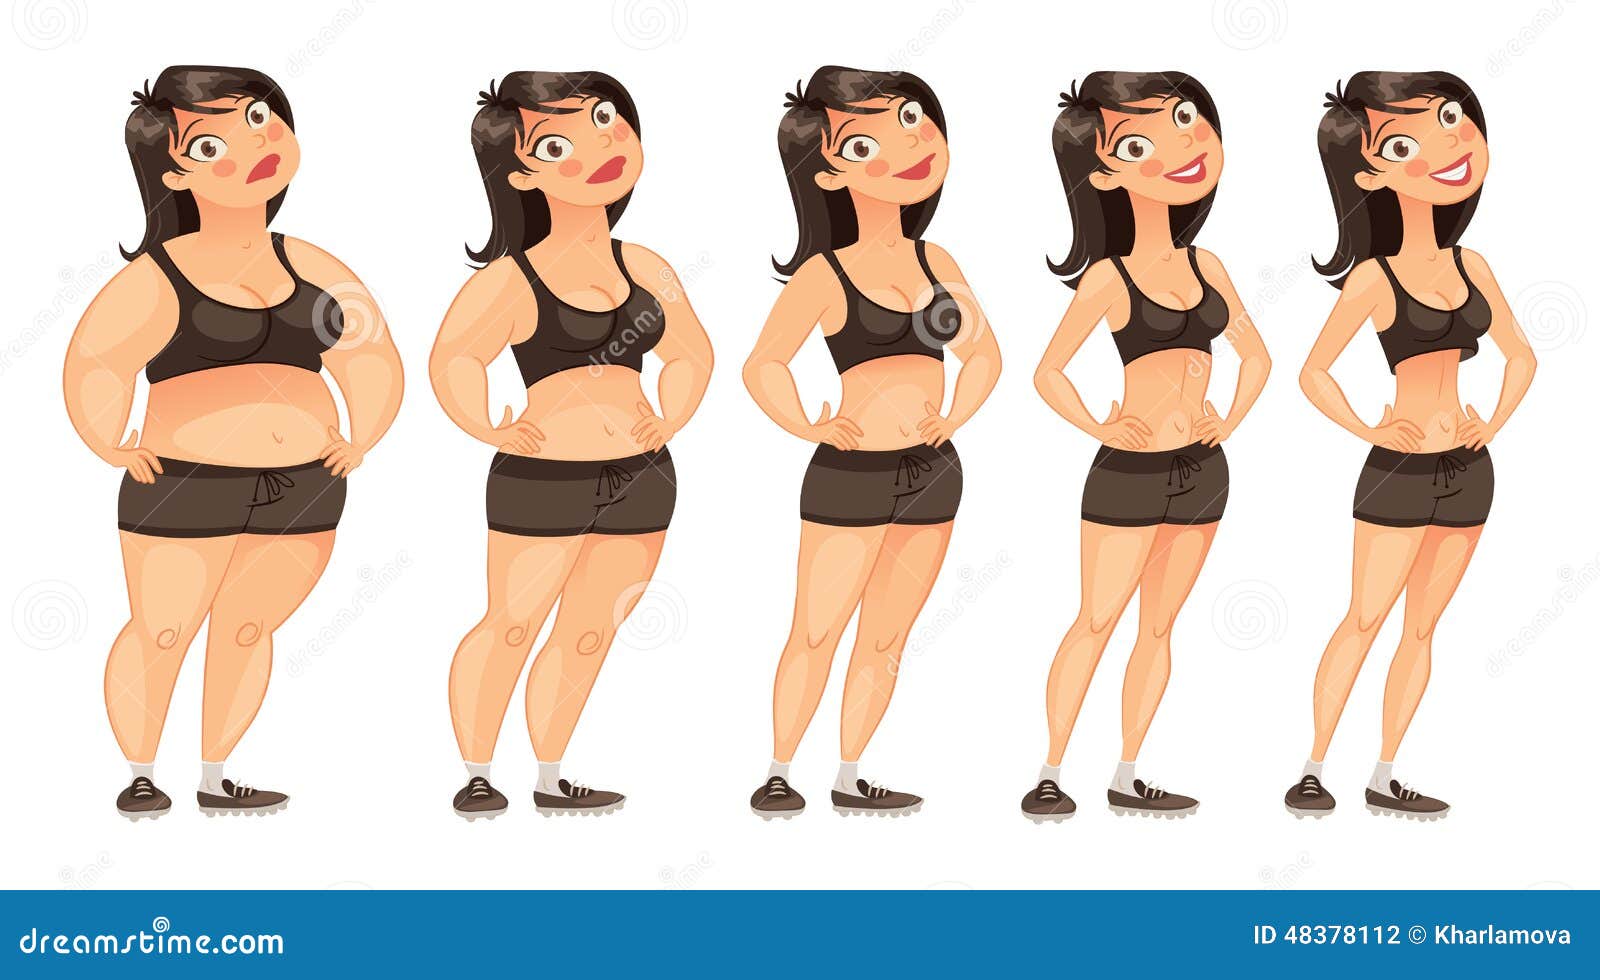 stages of weight loss